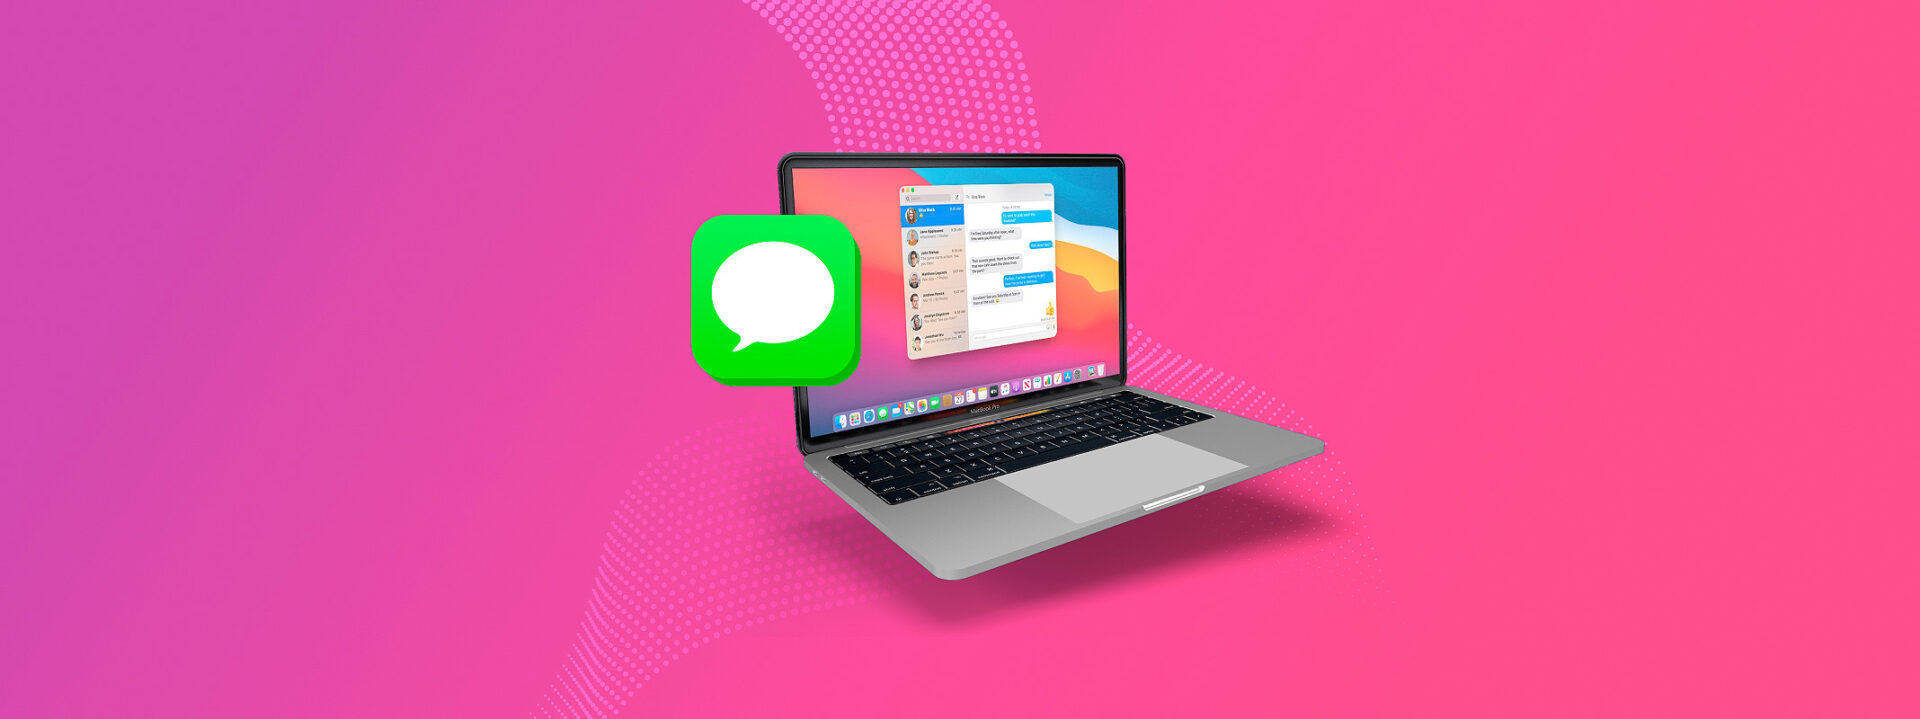 how to recover deleted imessages on macbook pro